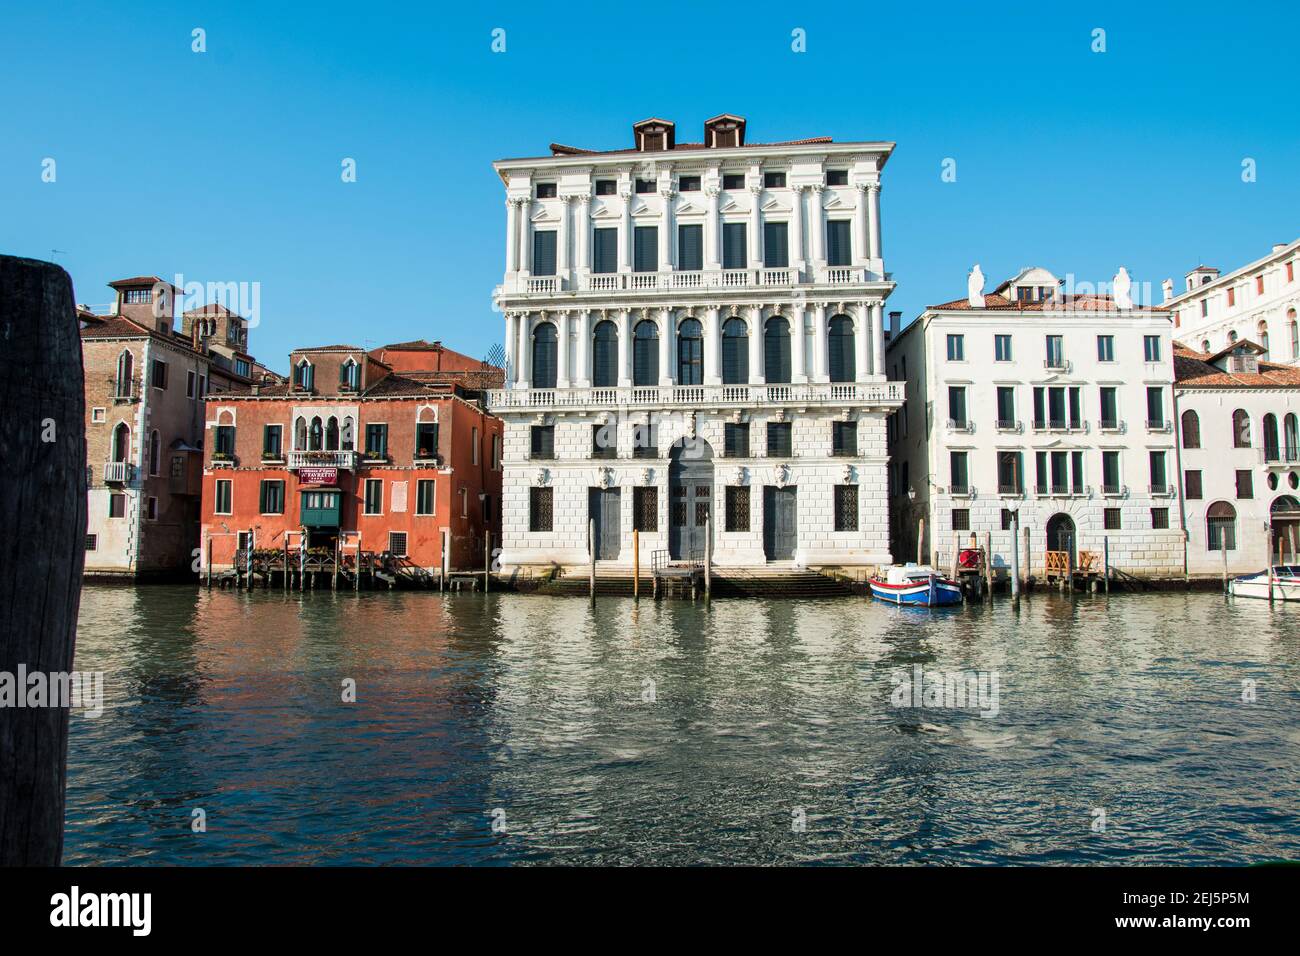 Buildings on the Grand Canal, city of Venice, Italy, Europe Stock Photo